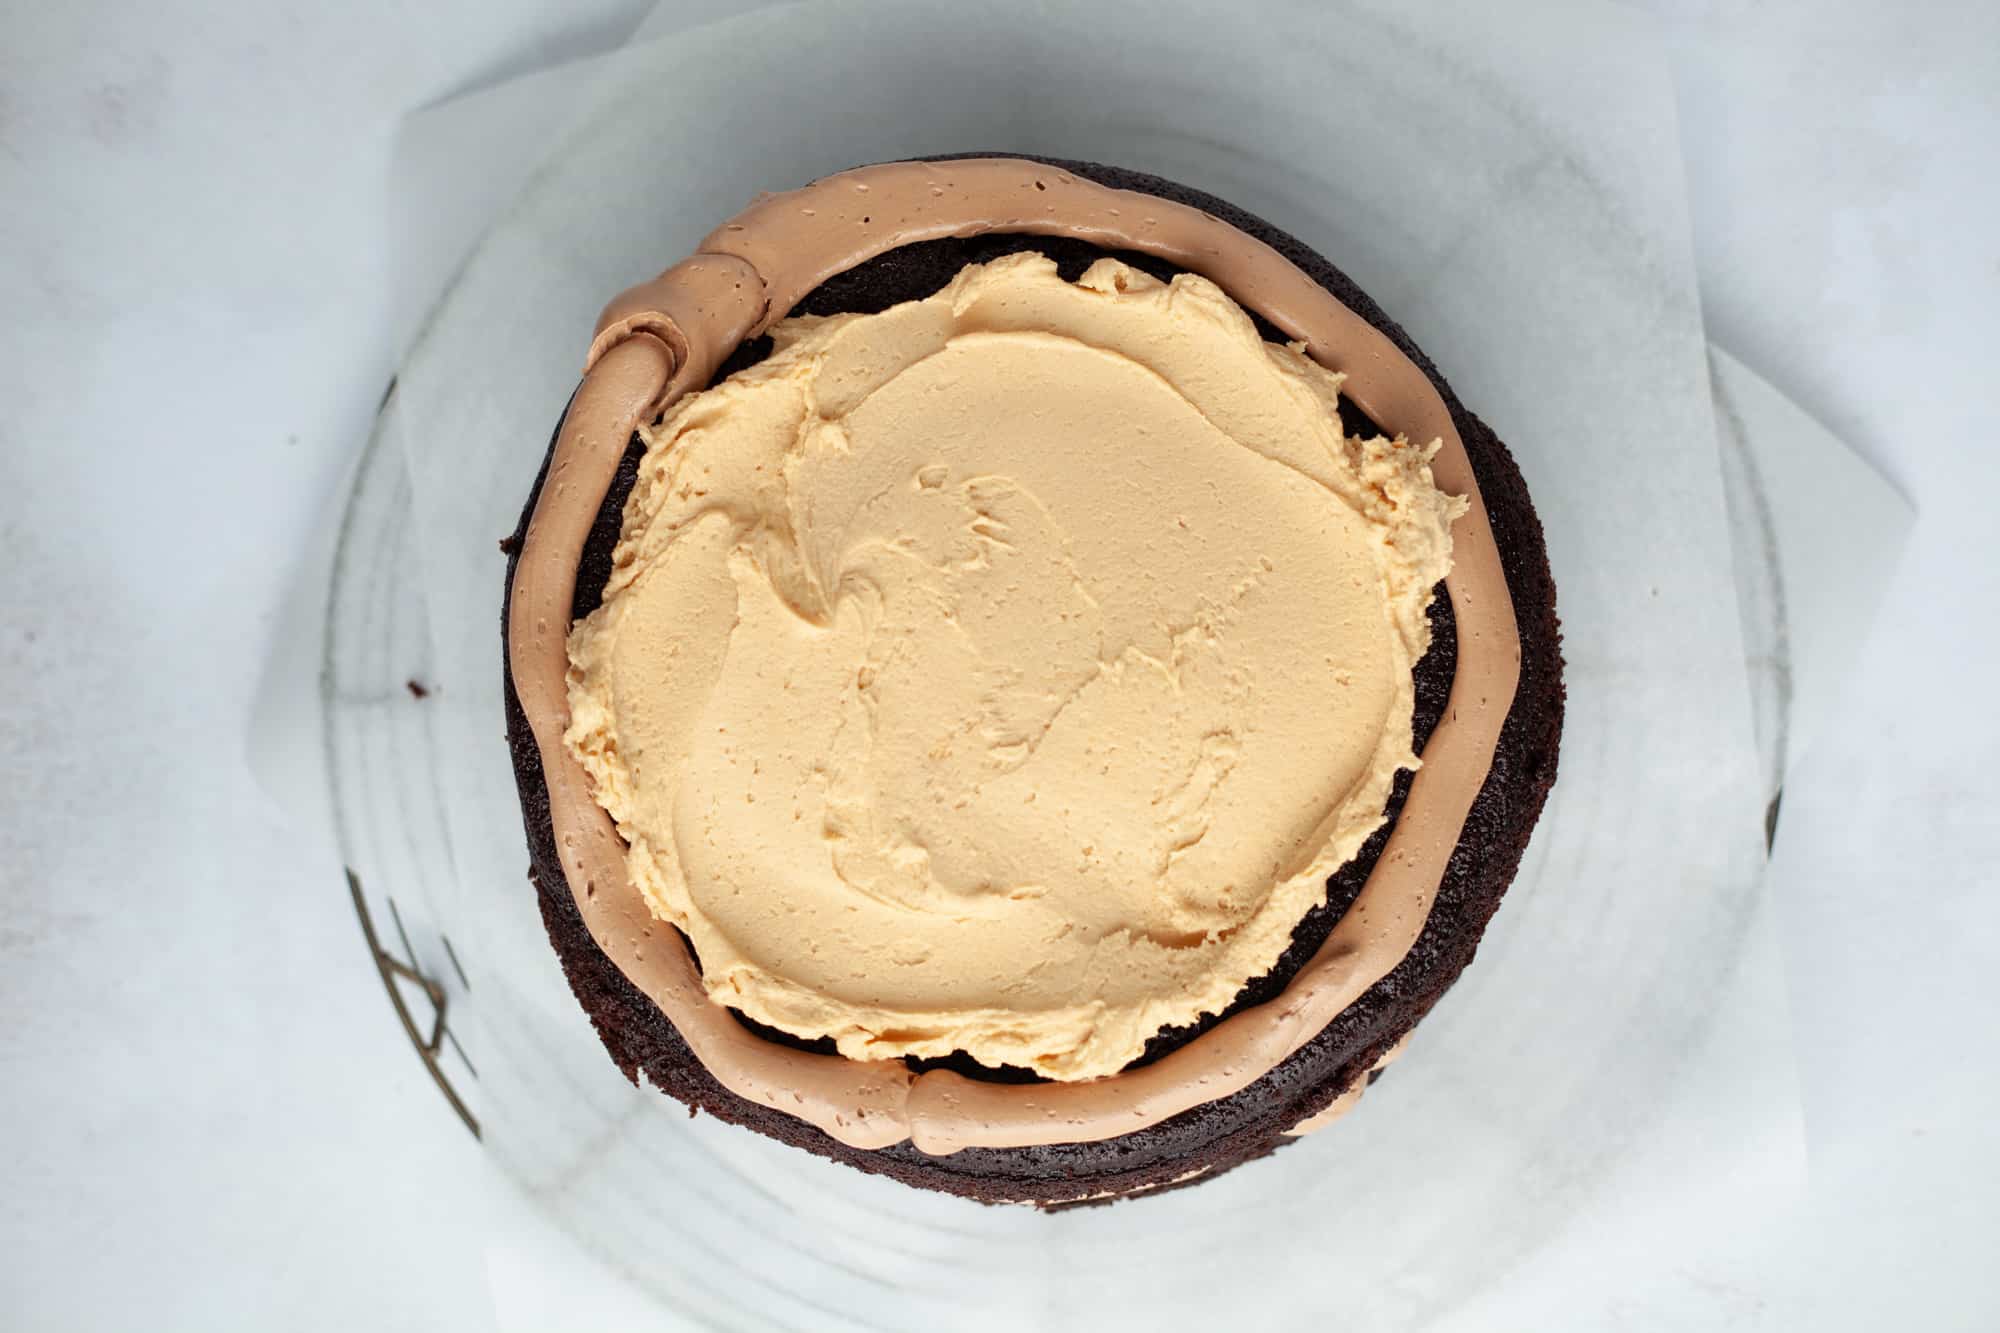 An overhead shot of a chocolate cake on parchment paper. The cake has an outer ring of chocolate frosting, and the middle is filled with a peanut butter filling